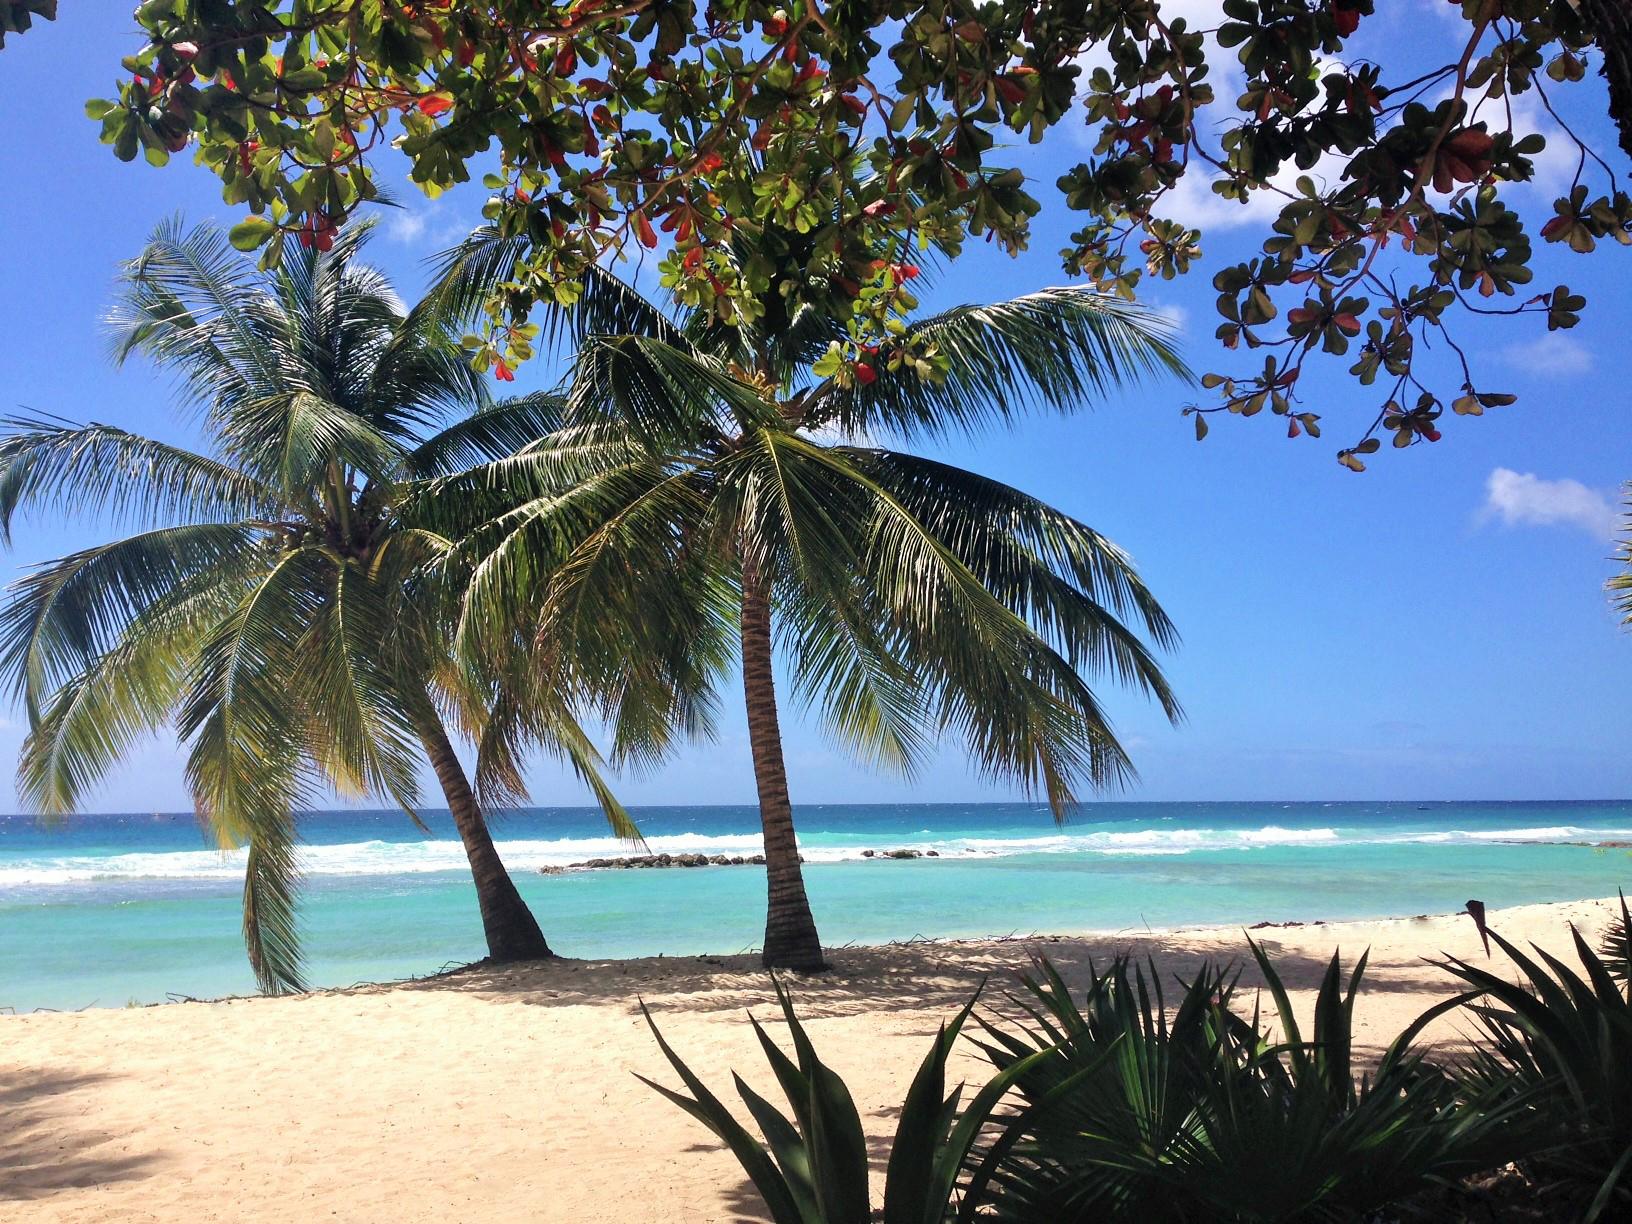 There’s nothing wrong with occasionally indulging in the all-inclusive lushness of a paradise like Sugar Bay